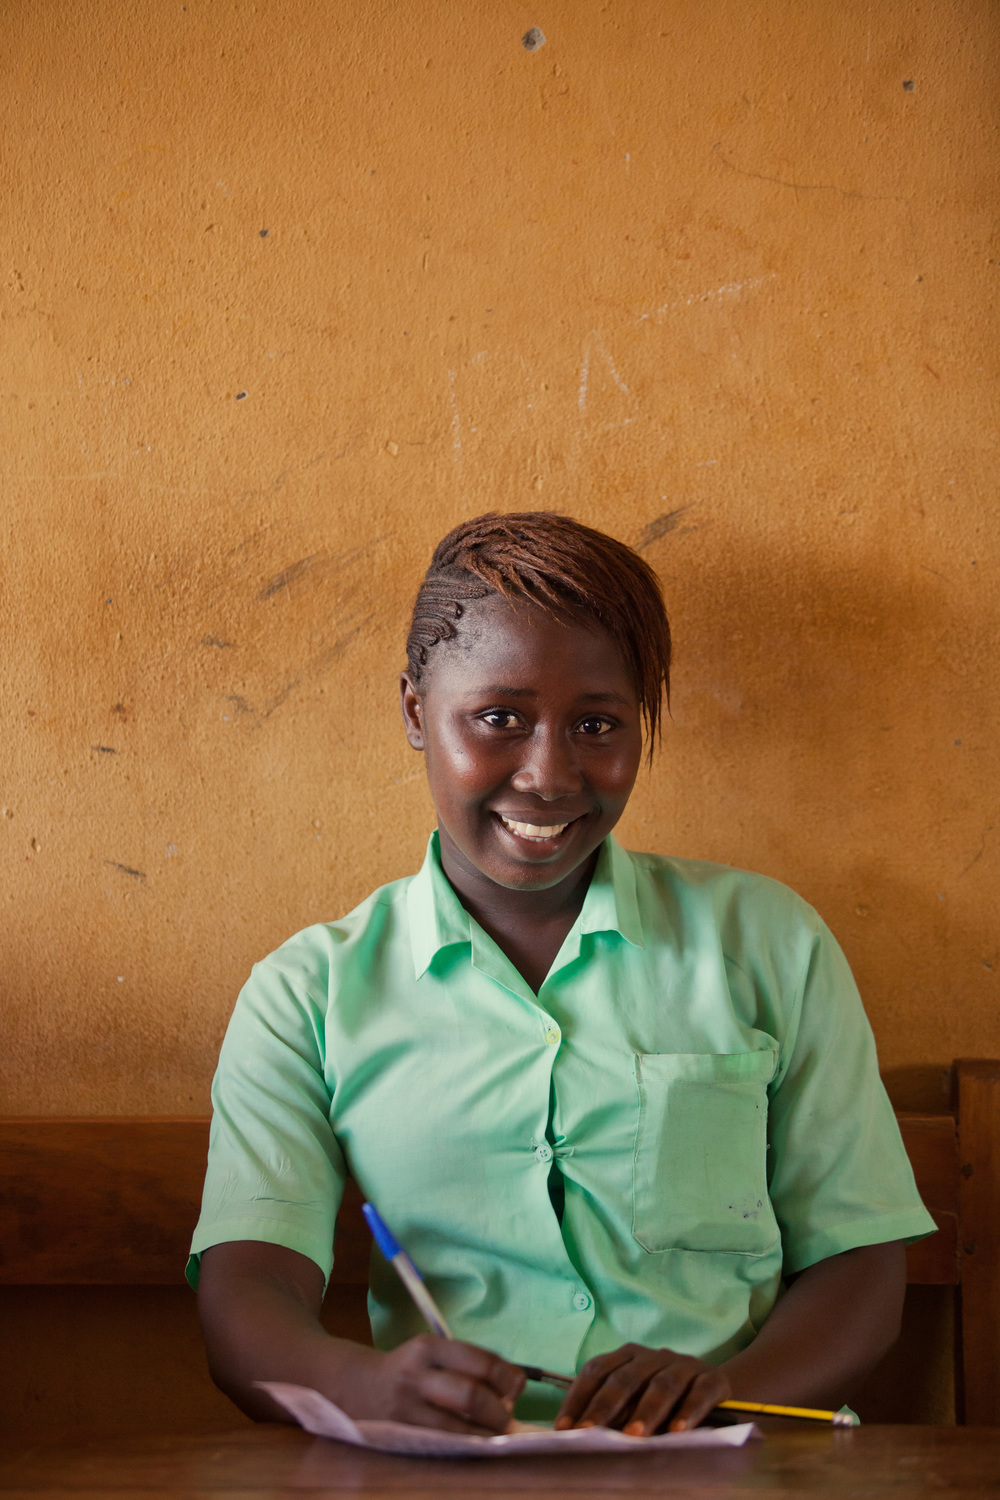  Isha's f amily was displaced by the war in Sierra Leone soon after she was born, and they had to leave their support network behind them. When Ebola hit the country last year, it claimed both of her parents. Isha, 15, is quick to smile and gets good